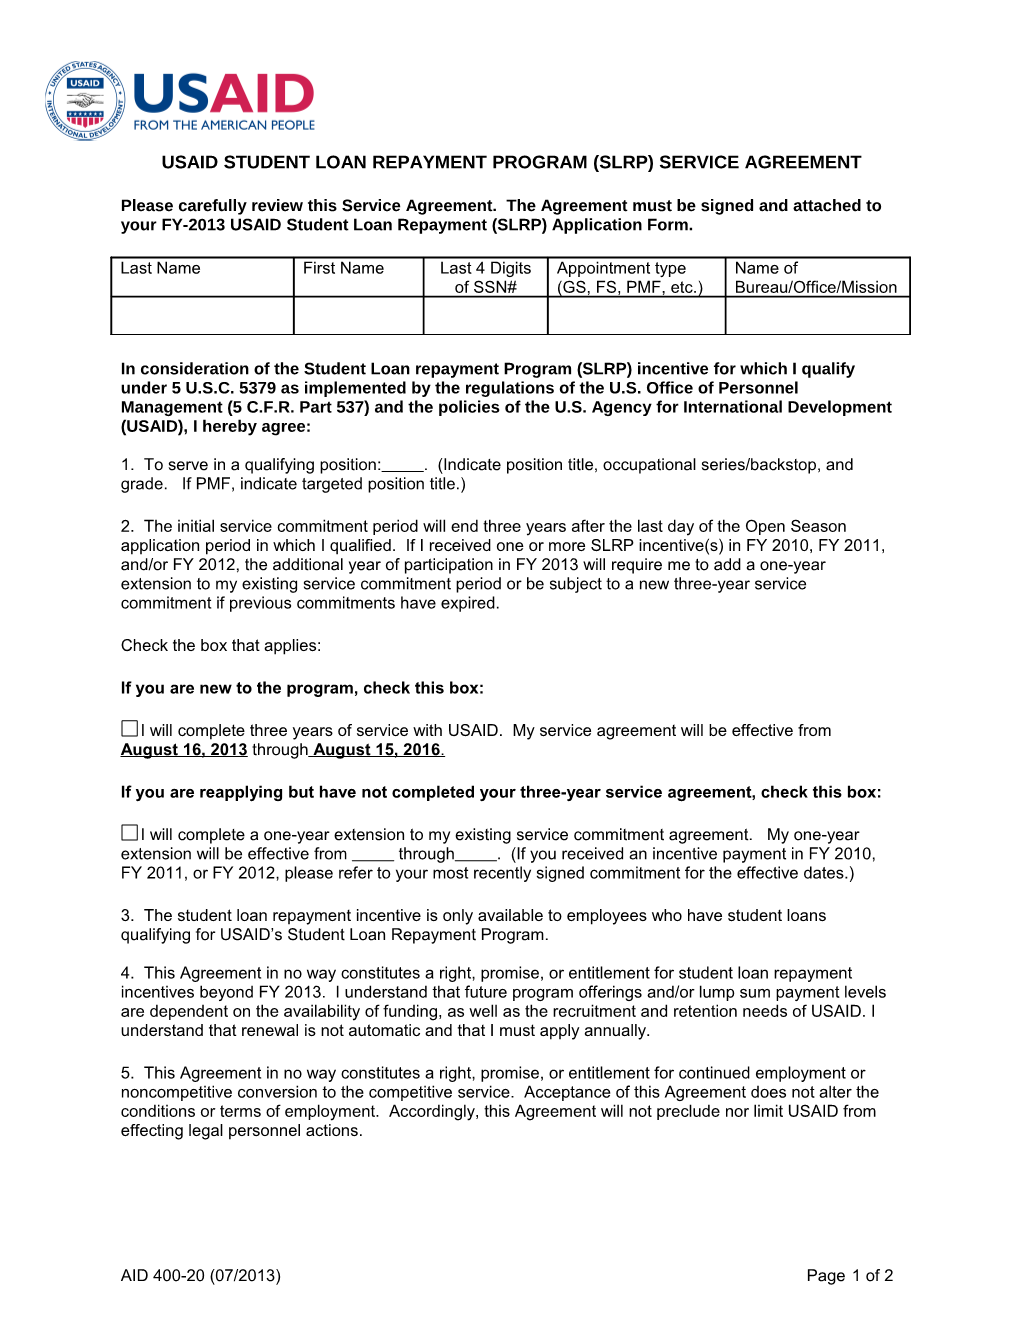 Usaid Student Loan Repayment Program Service Agreement